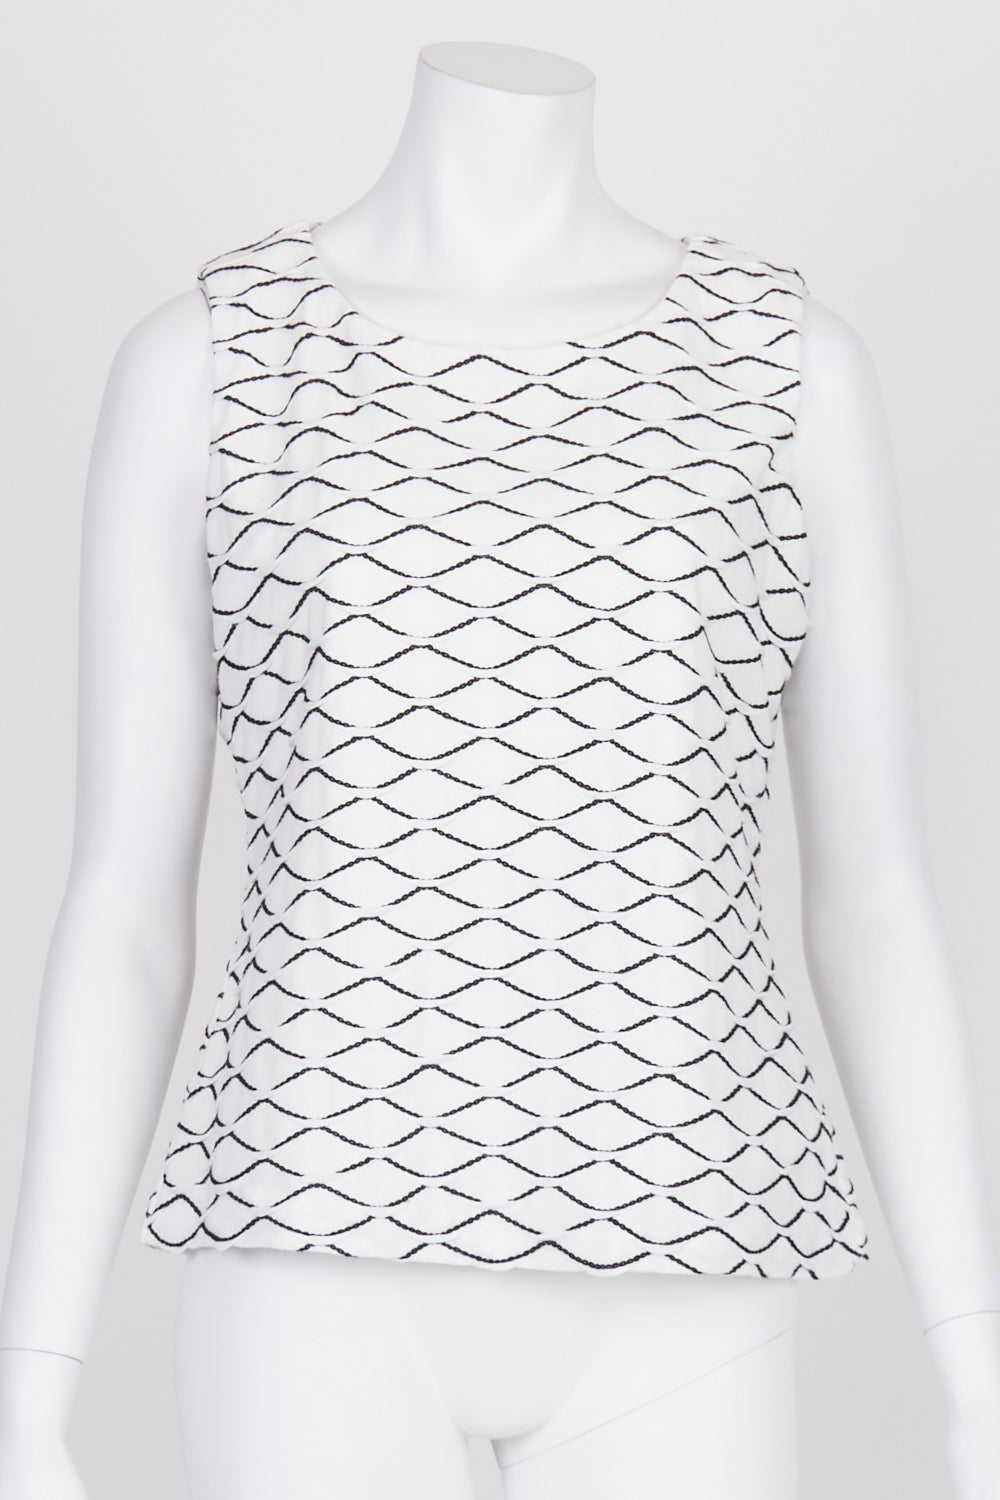 Calvin Klein Black And White Patterned Top 10